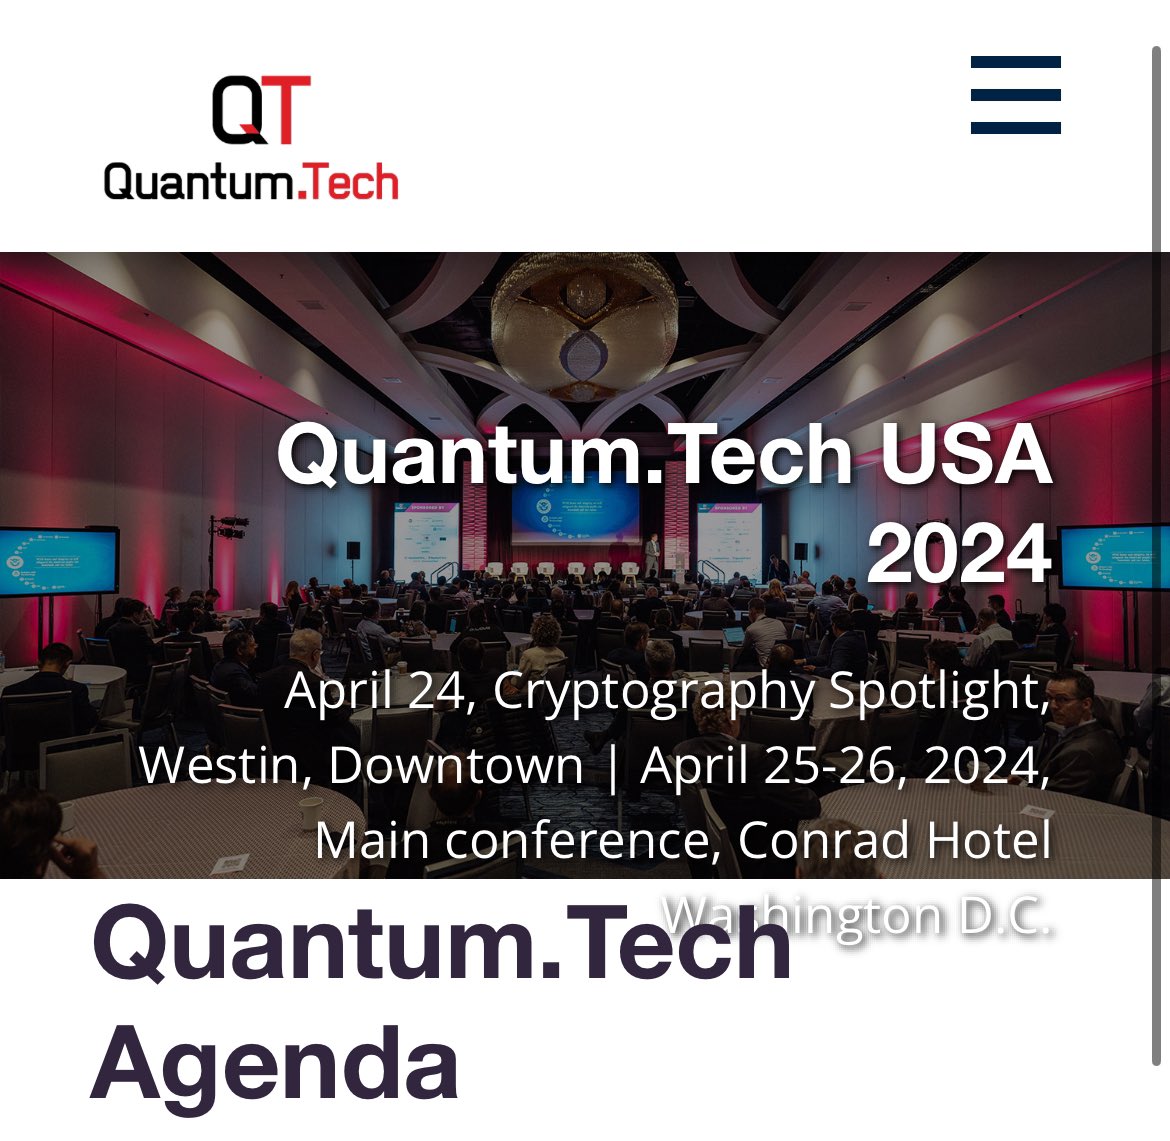 Time to talk about innovation in the quantum area at #QuantumTech in Washington D.C. Excited about a fruitful exchange between stakeholders from different areas. #DYK quantum technology offers huge opportunities for chemical industry? | @QuantumTech_